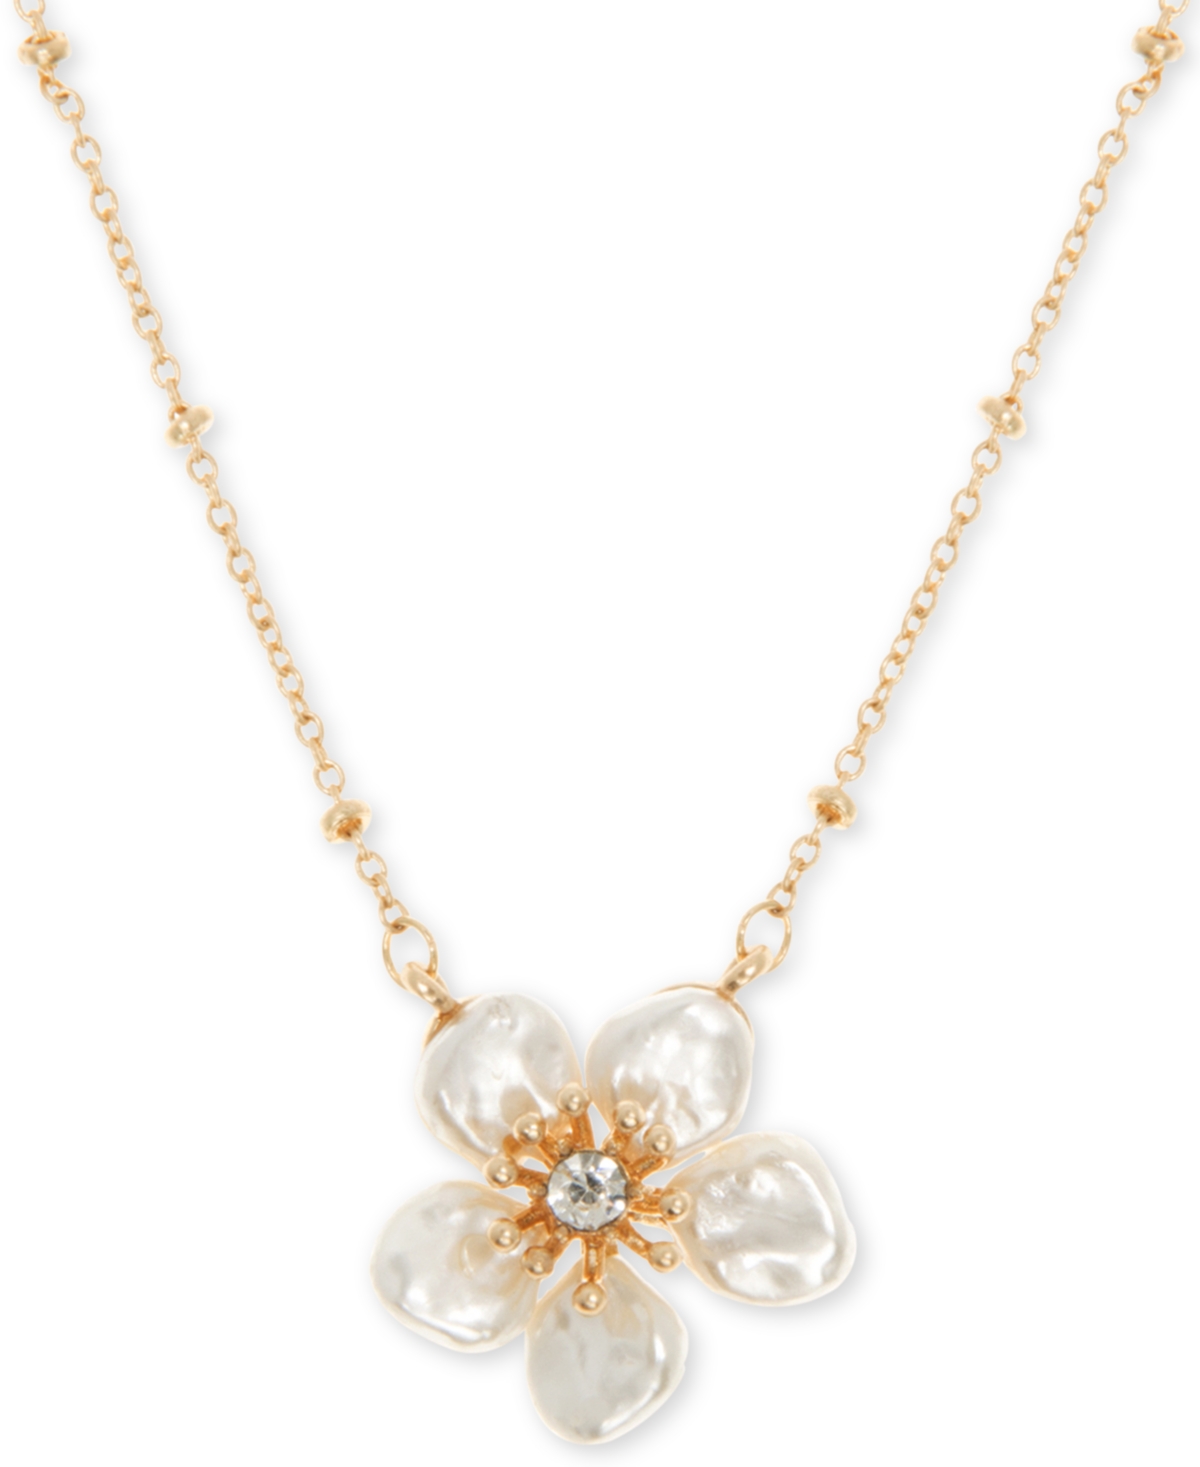 Gold-Tone Crystal Flower Pendant Necklace, 16" + 3" extender - White